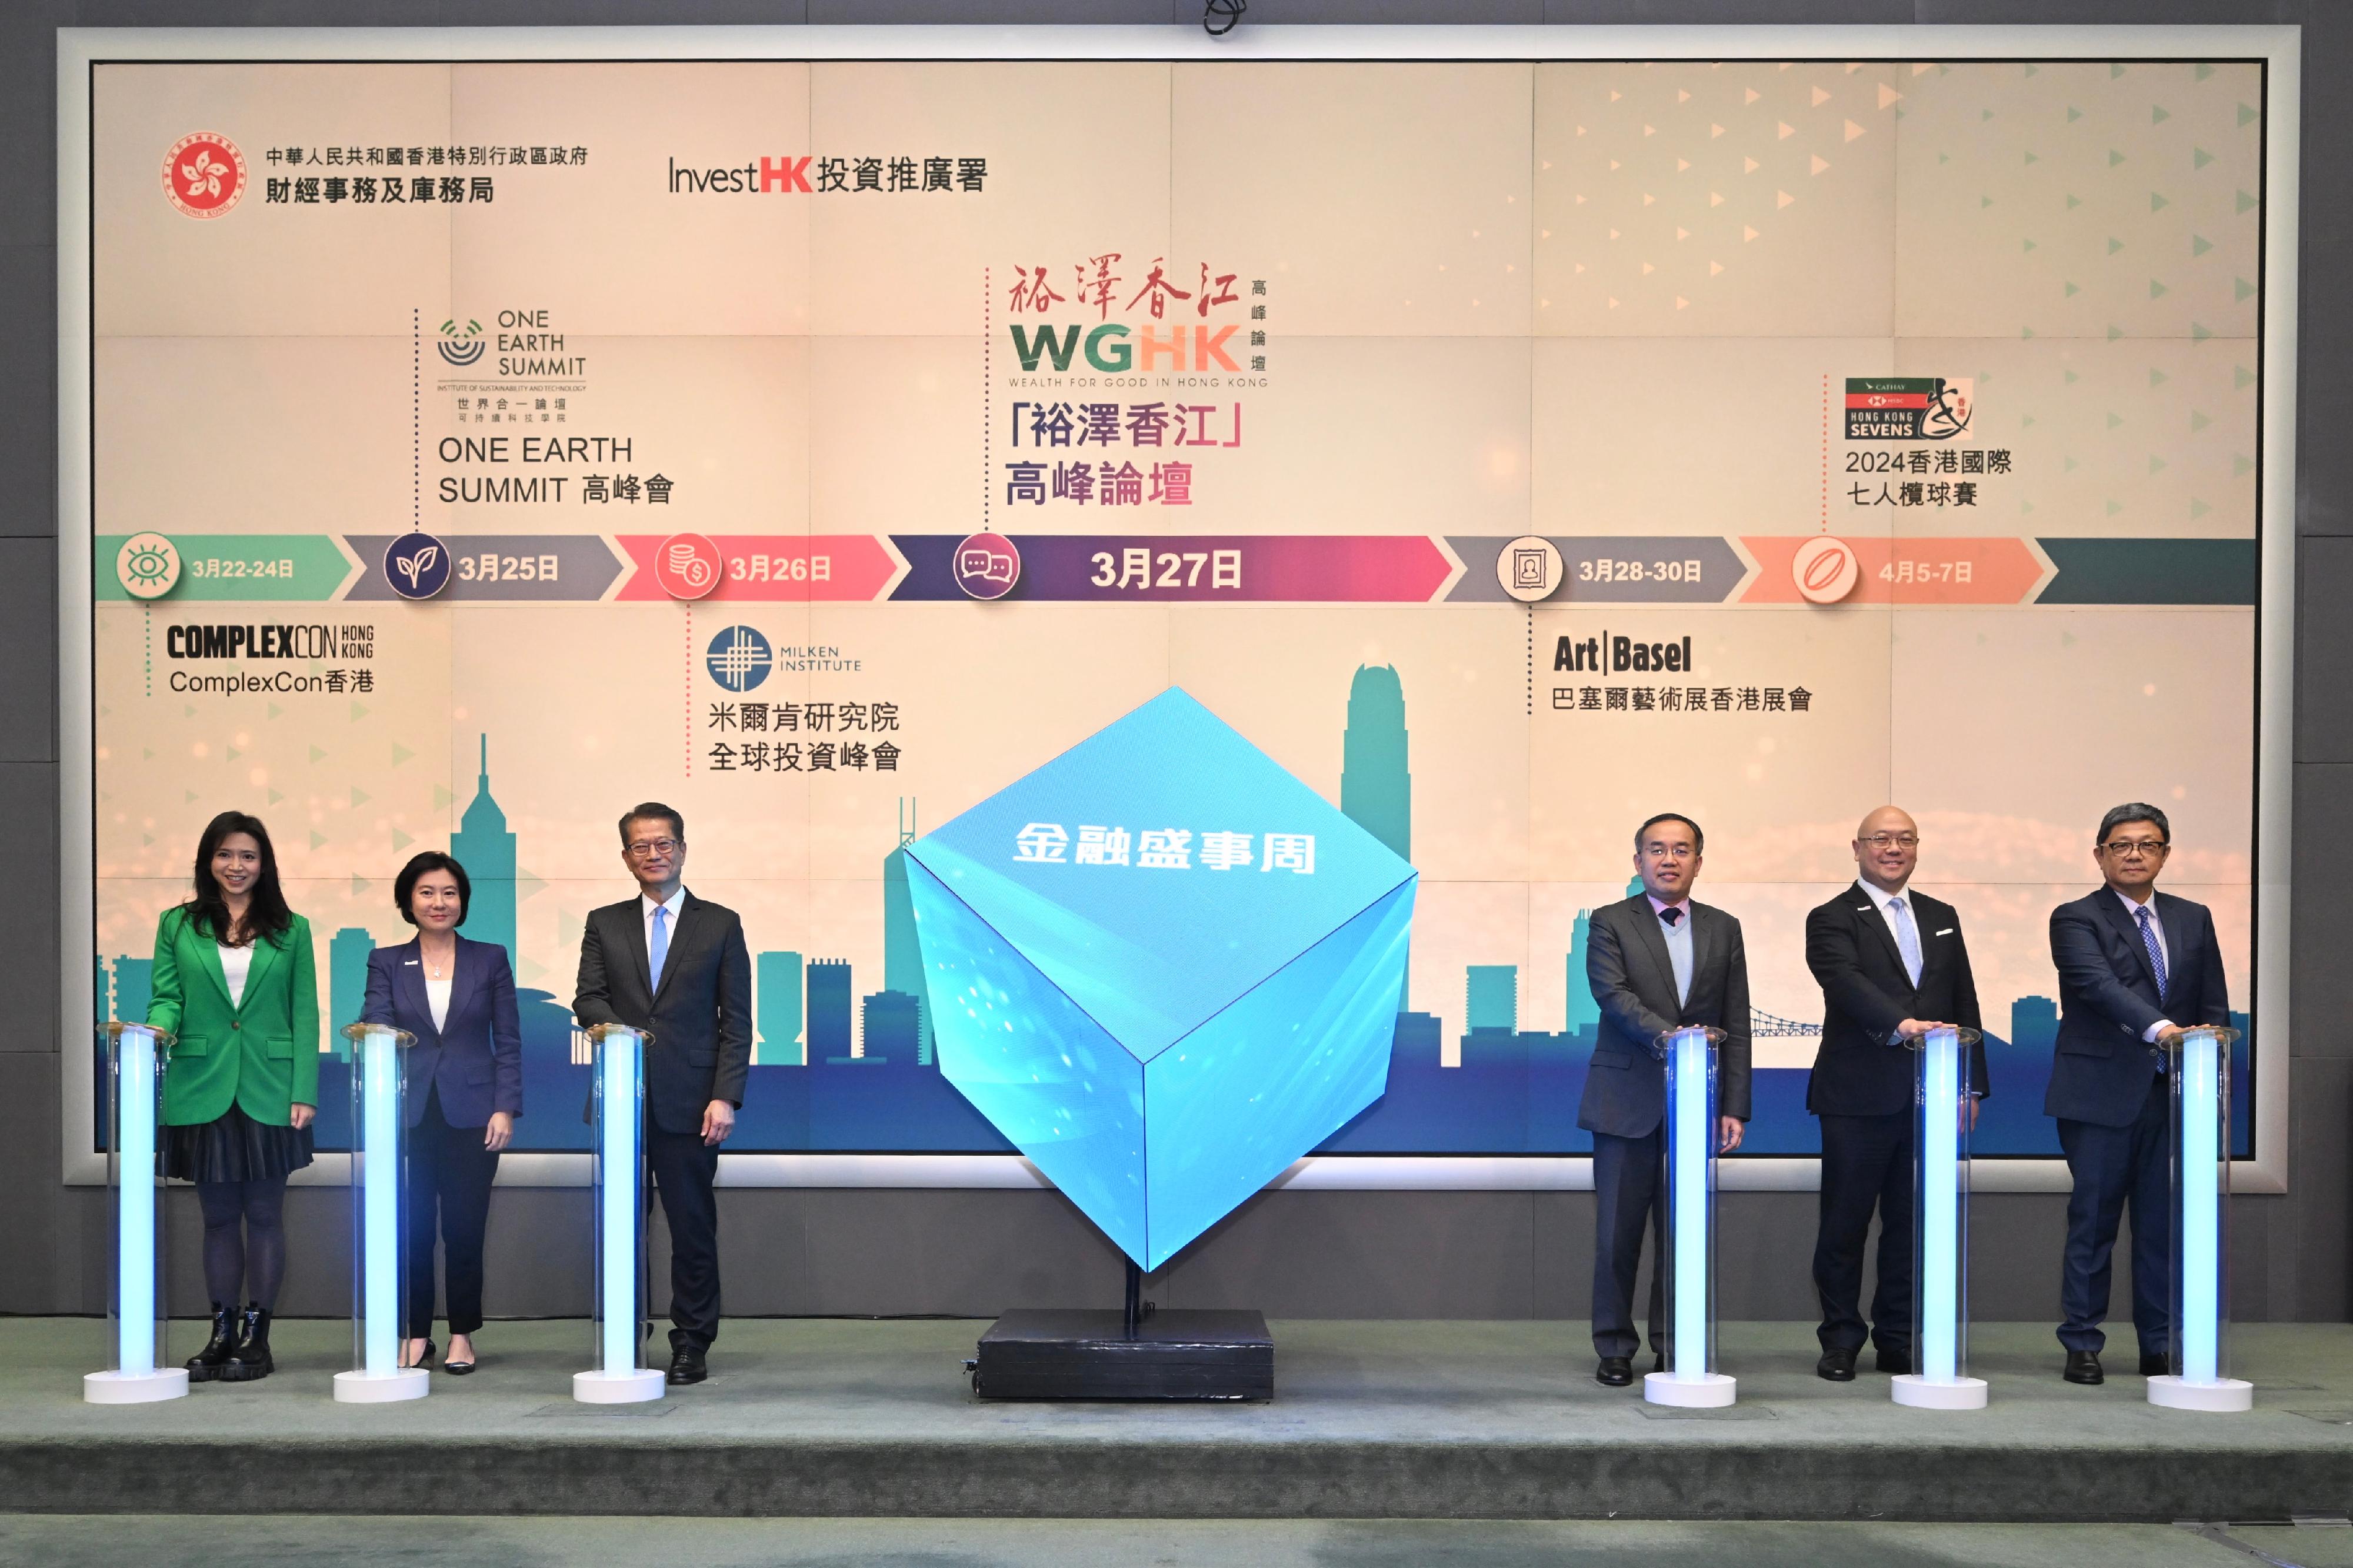 The Financial Secretary, Mr Paul Chan, attended the launching ceremony of the Financial Mega Event Week today (March 7). Photo shows (from left) the Founder of the Institute of Sustainability and Technology, Ms Poman Lo; the Director-General of Investment Promotion, Invest Hong Kong, Ms Alpha Lau; Mr Chan; the Secretary for Financial Services and the Treasury, Mr Christopher Hui; the Associate Director-General of Investment Promotion, Invest Hong Kong, Mr Charles Ng; and the Asia Chair of the Milken Institute, Mr Robin Hu, officiating at the ceremony.